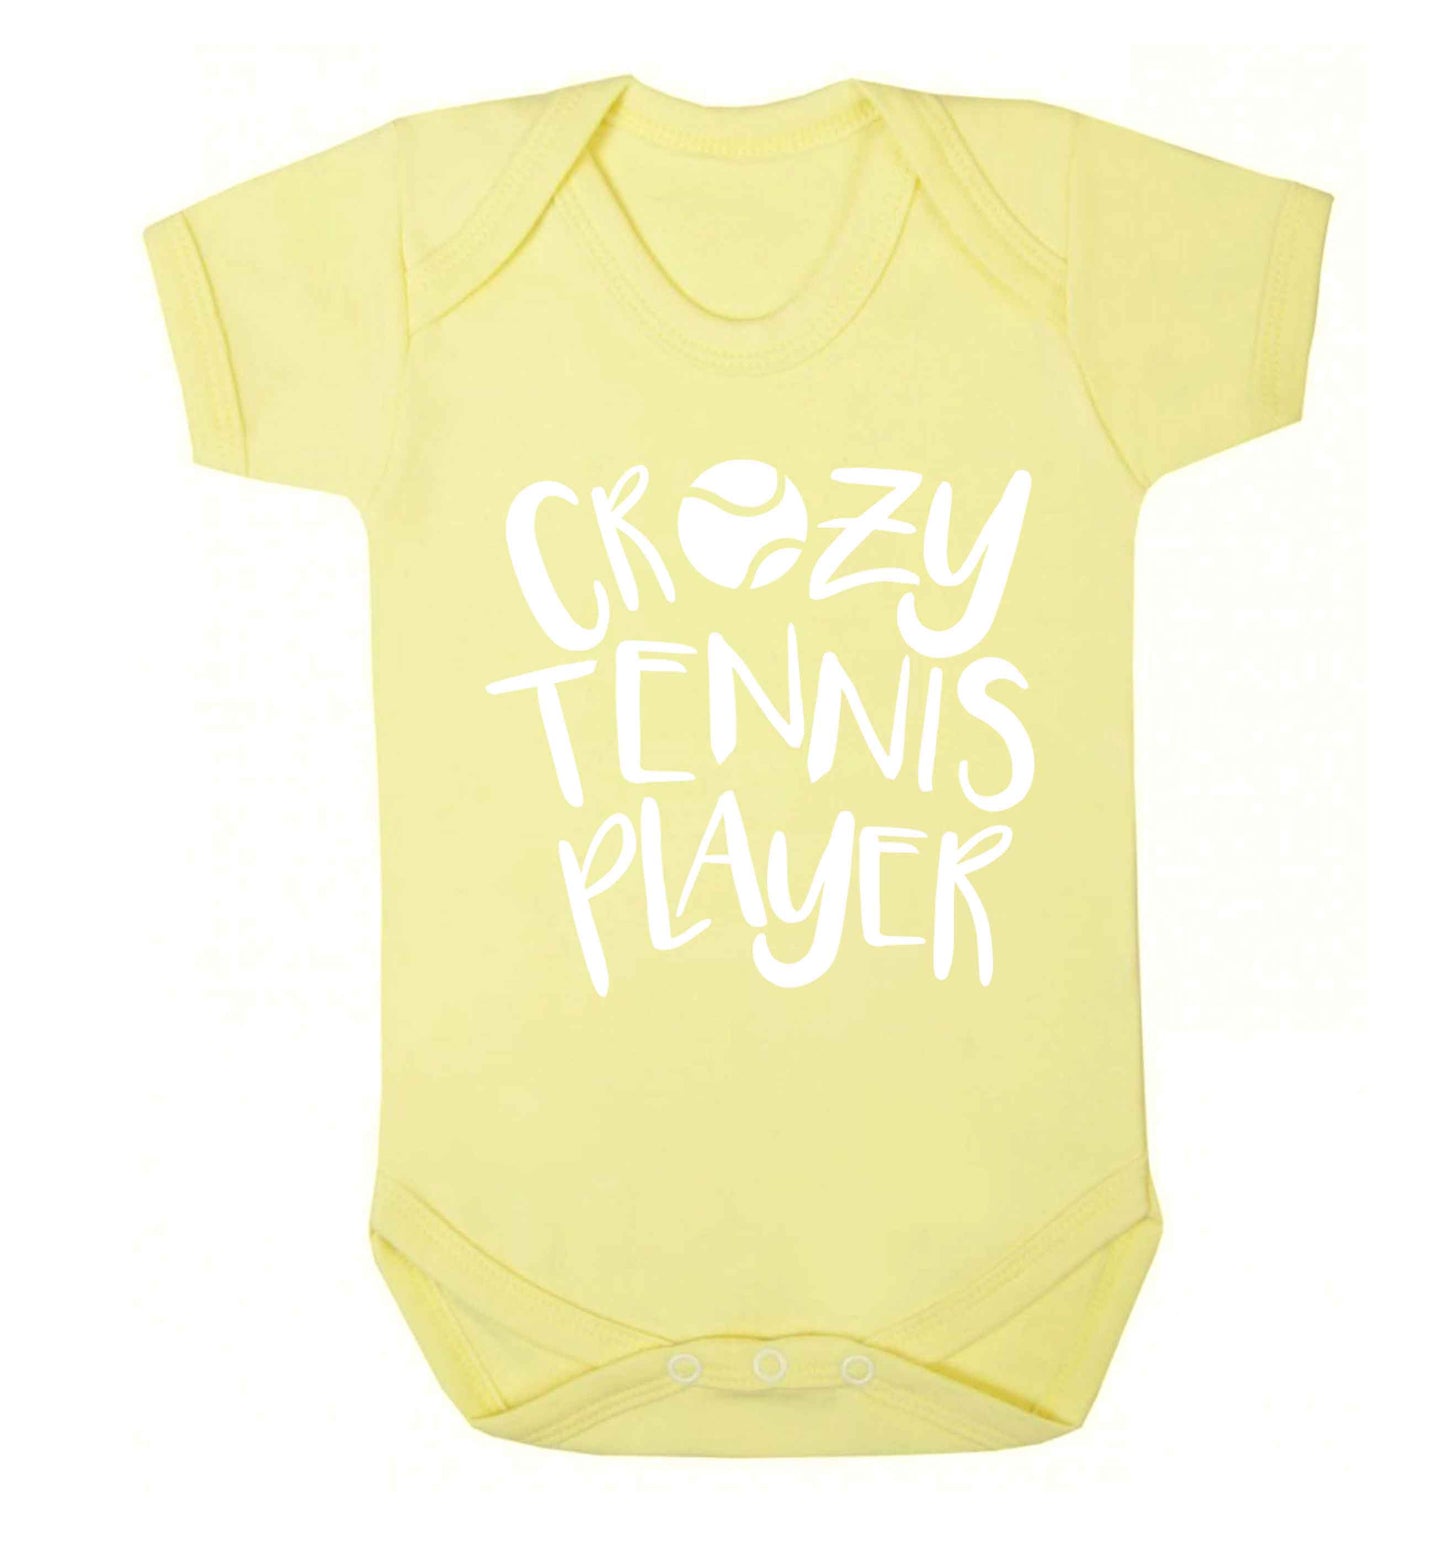 Crazy tennis player Baby Vest pale yellow 18-24 months